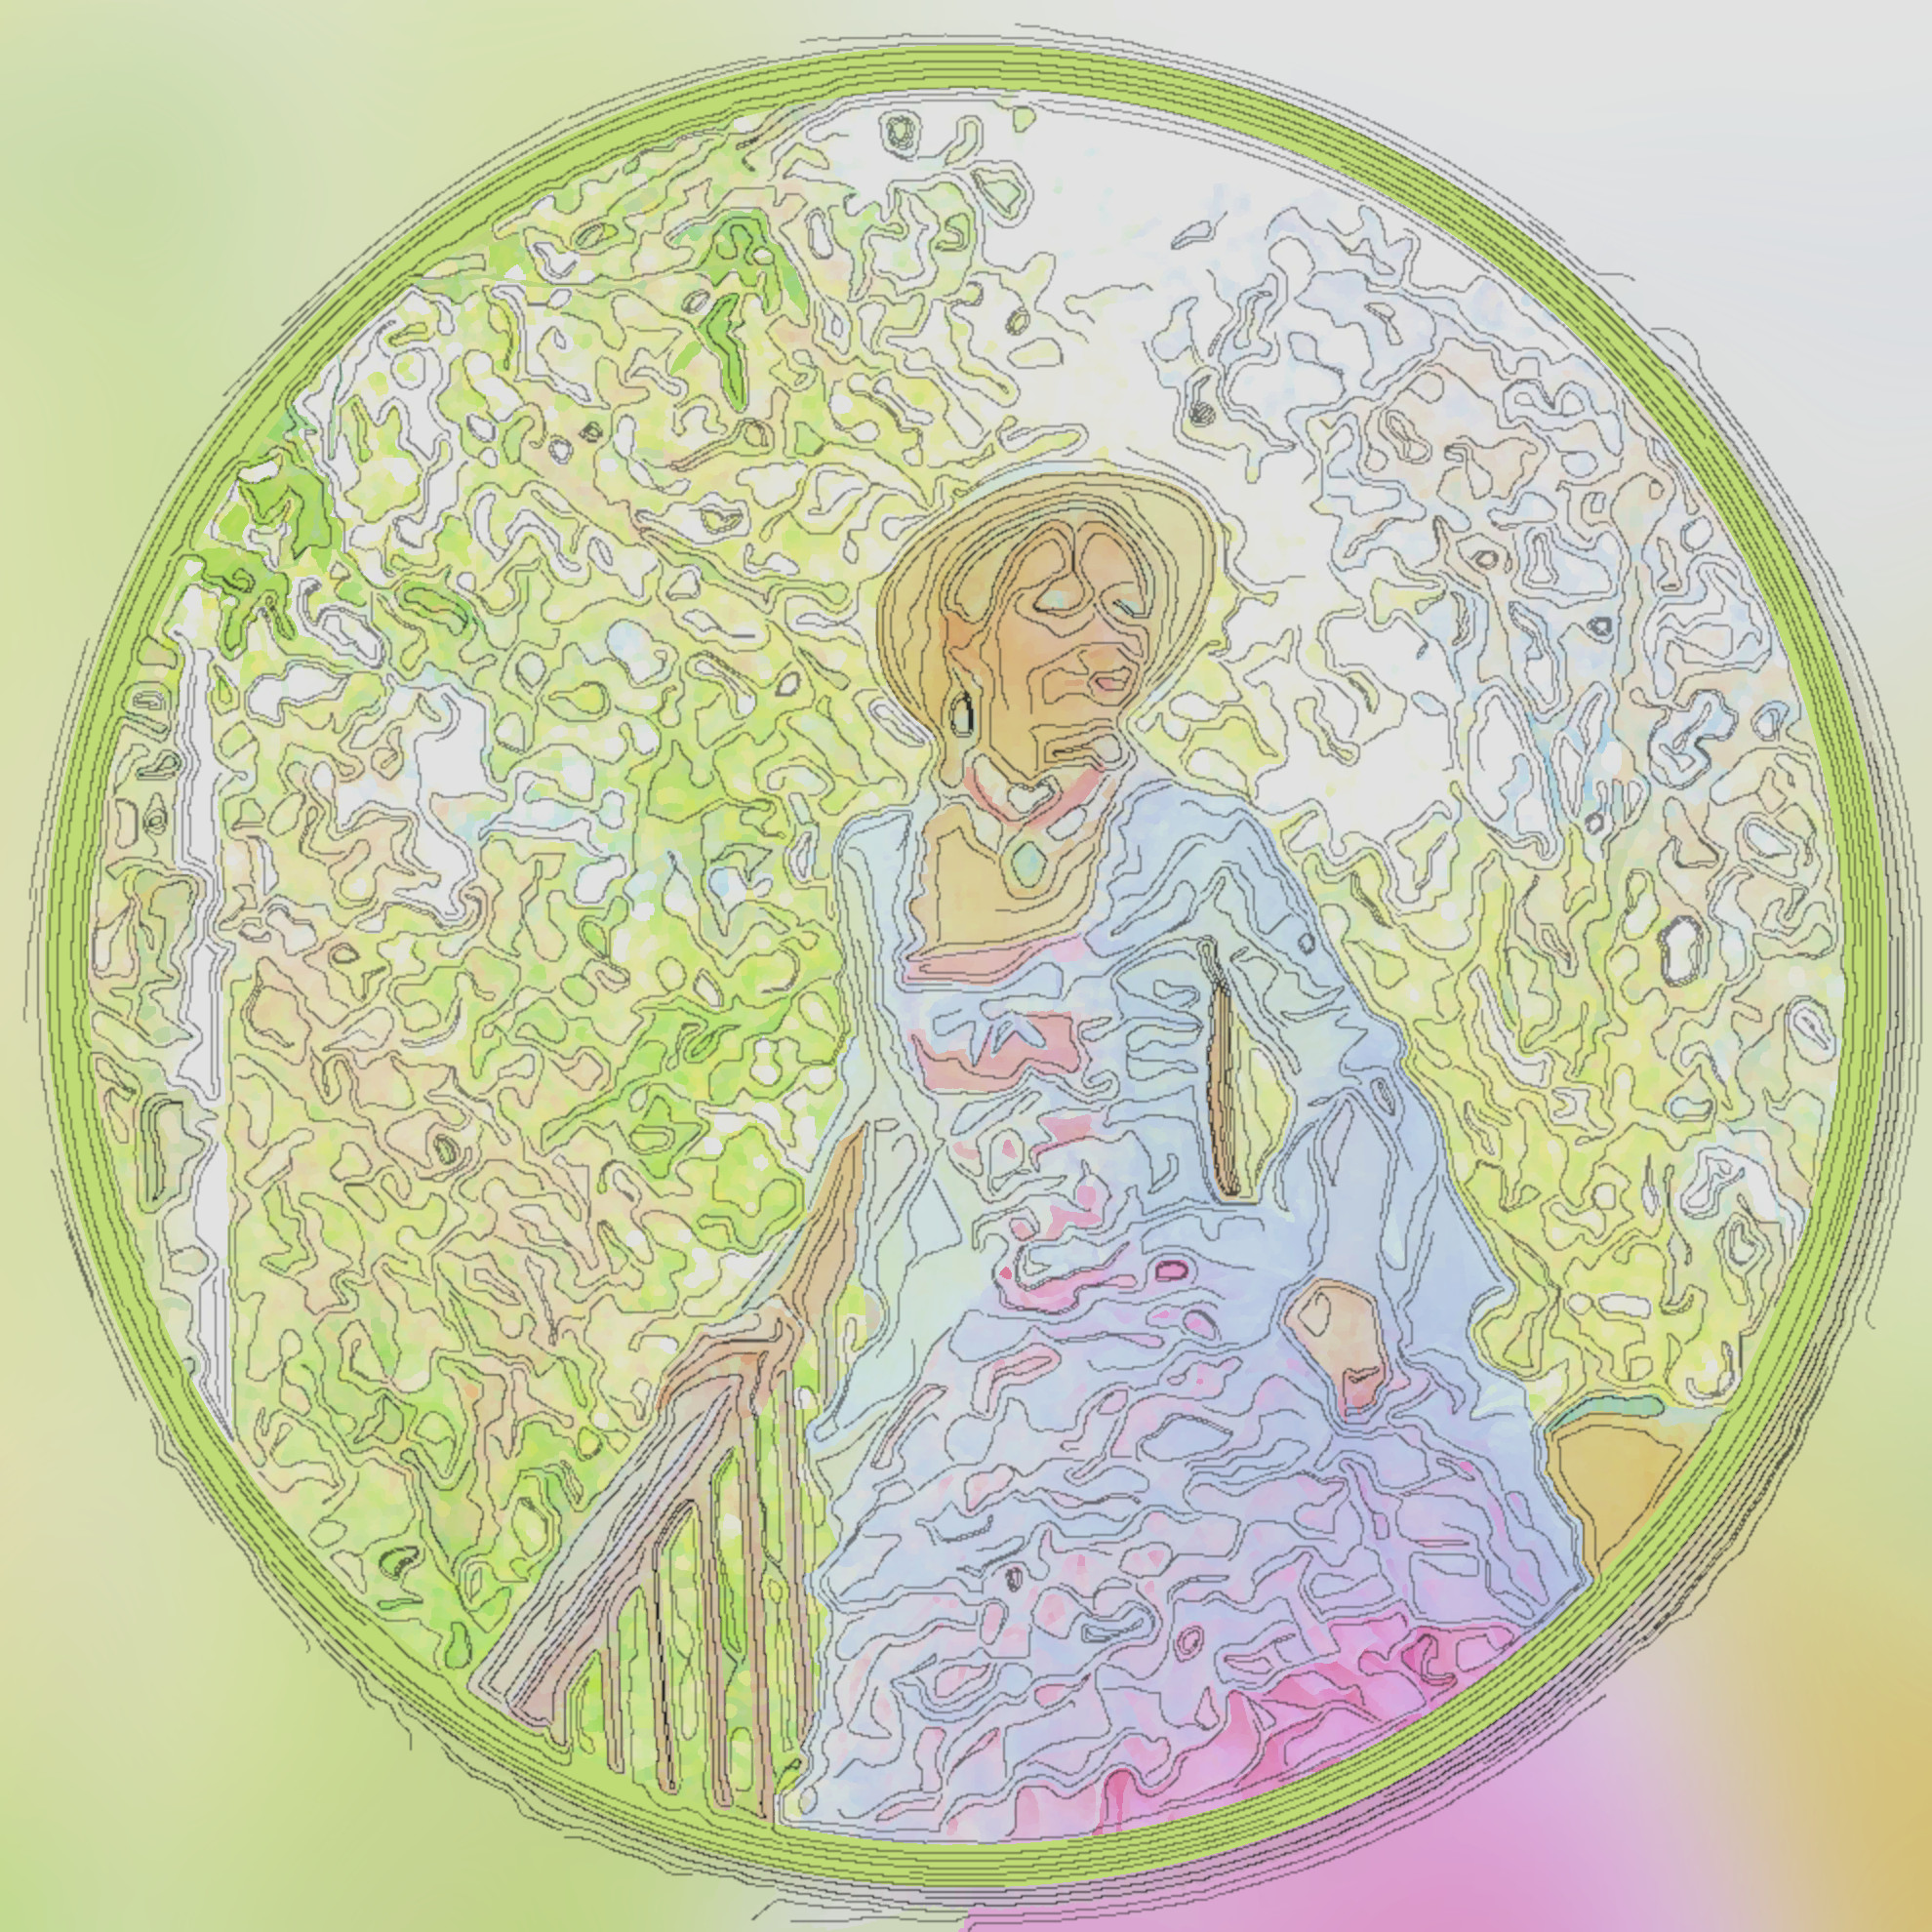 2023-05-26 08-32-13costume__evangeline___stock_image_by_aquilina108_dcczzoi-fullview_portrait with a framed Artistic effect, style Doodle.jpg